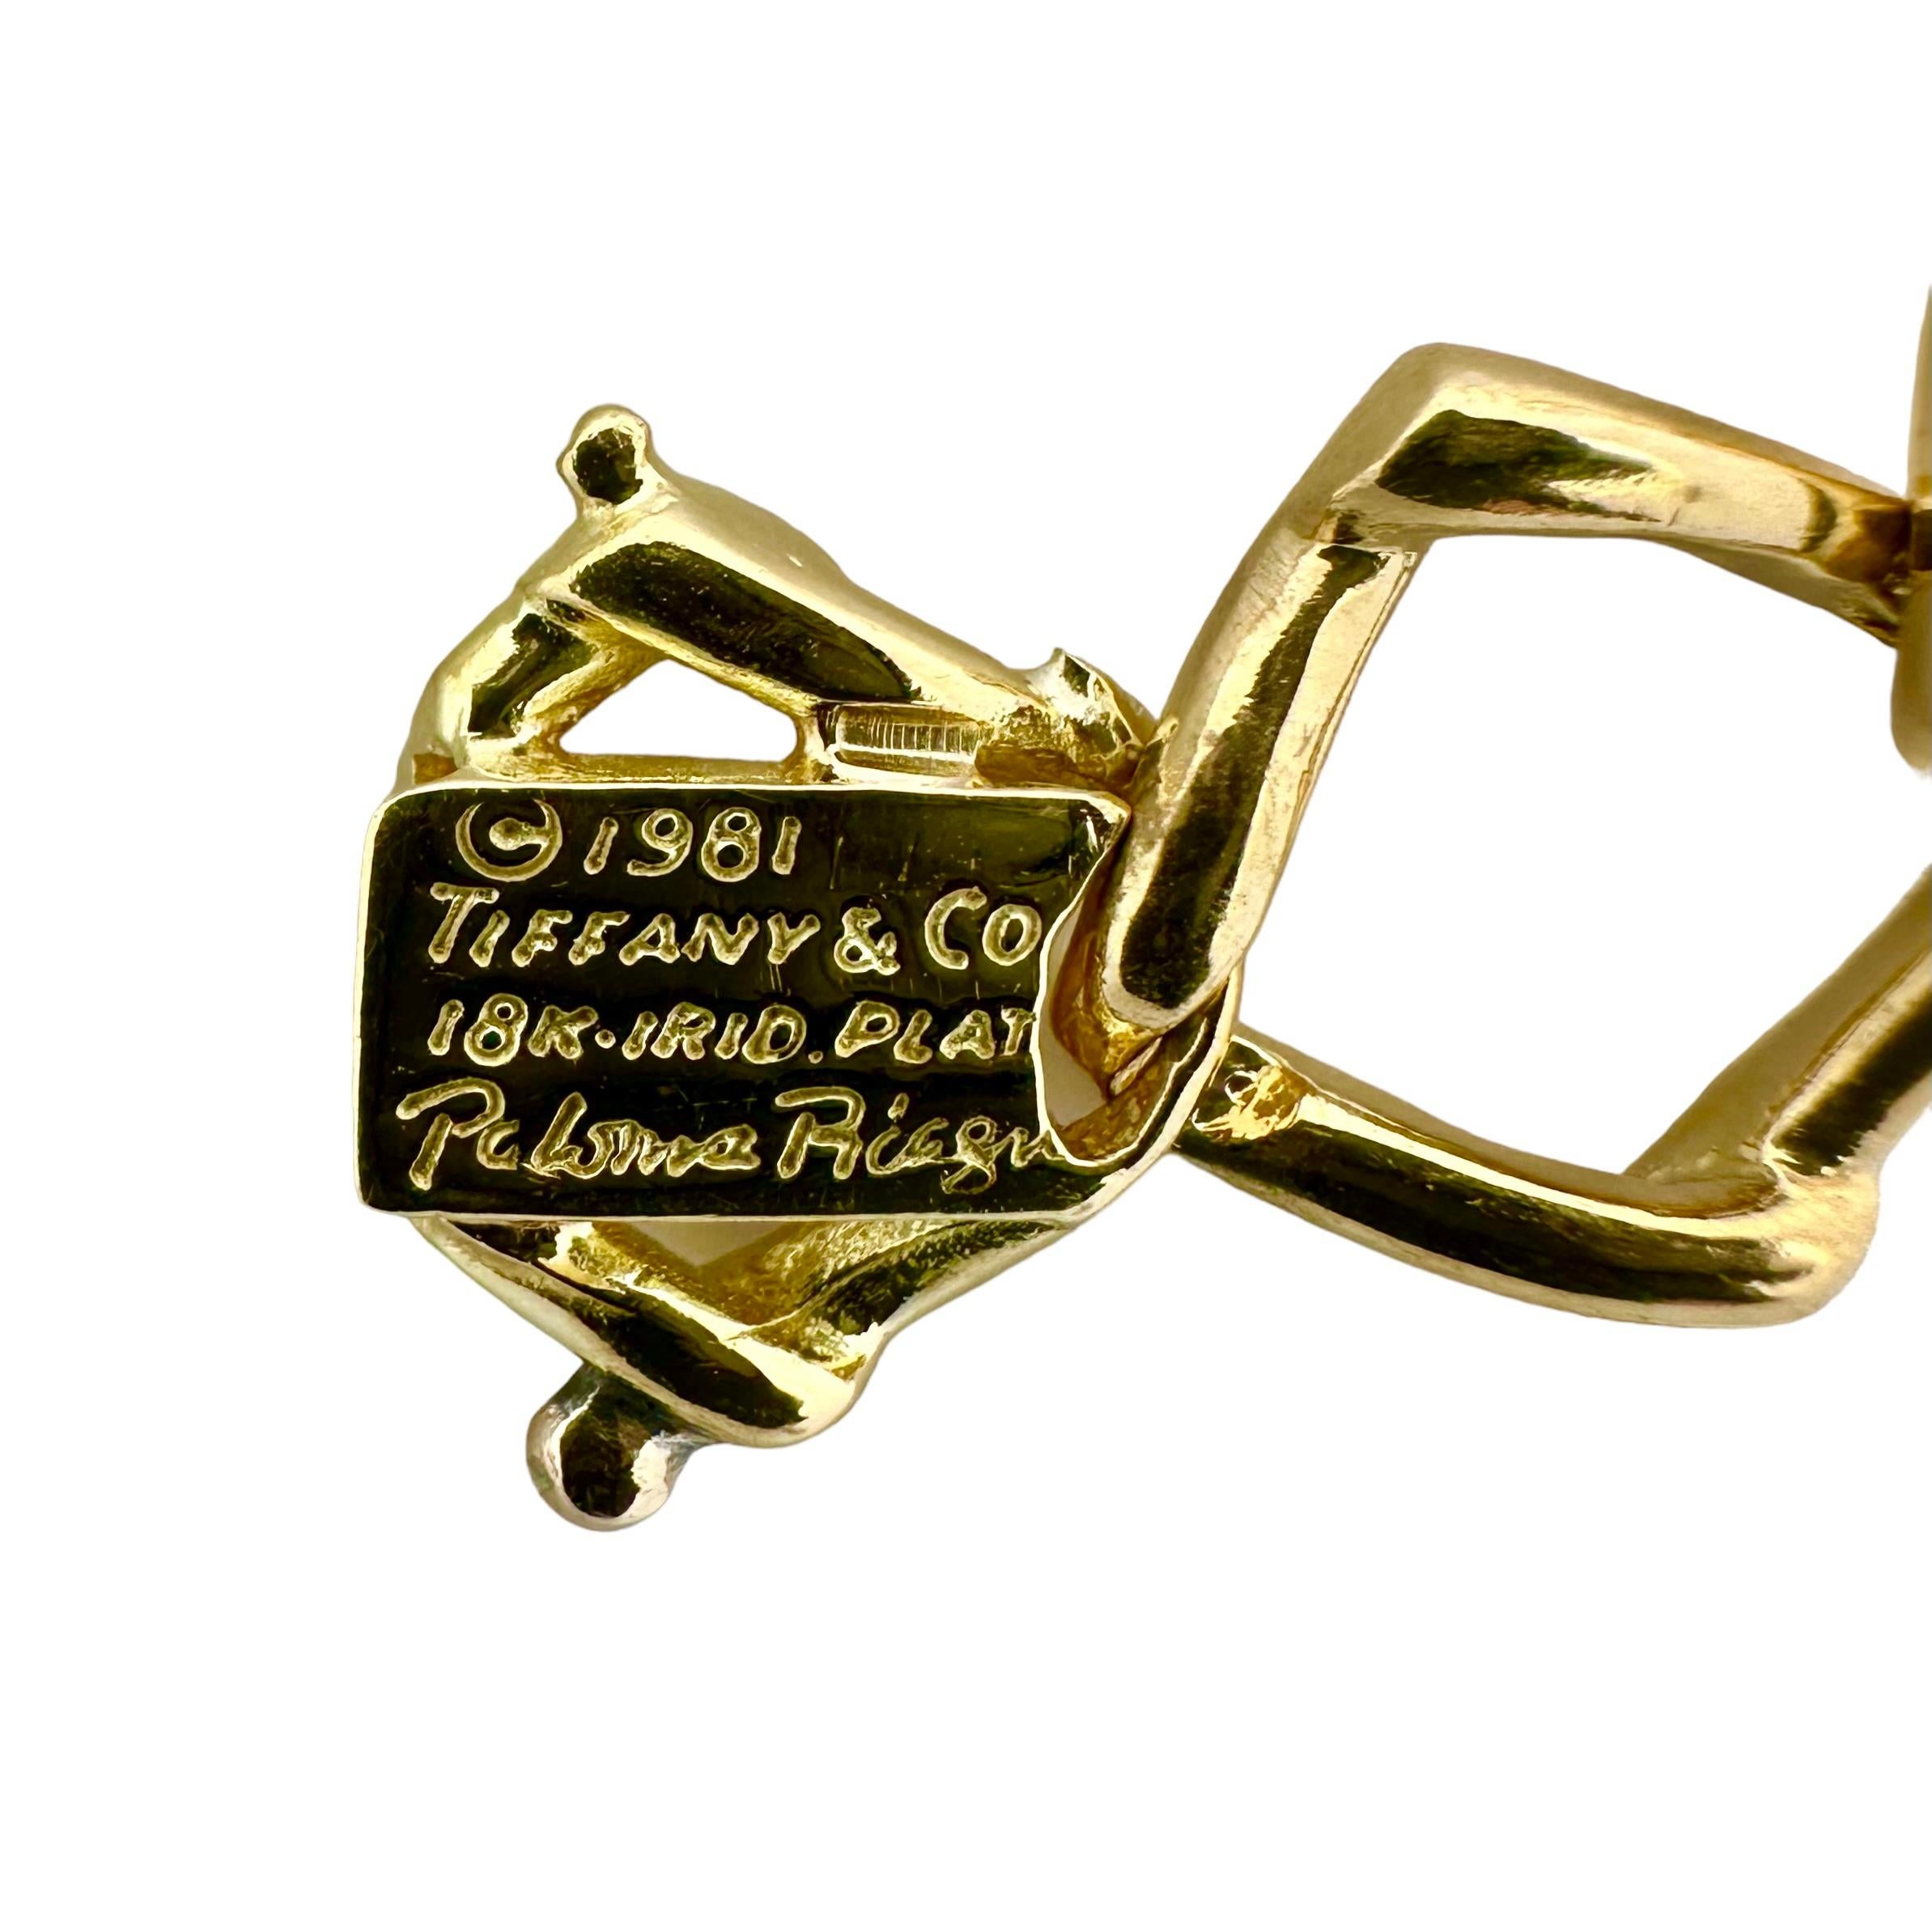 Designed by highly regarded artist, Paloma Picasso, and released by Tiffany & Co. in 1981, this wonderful casual 18k gold and diamond bracelet is a very tasteful item of vintage Tiffany. A total of sixteen yellow gold trapezoidal links have, at